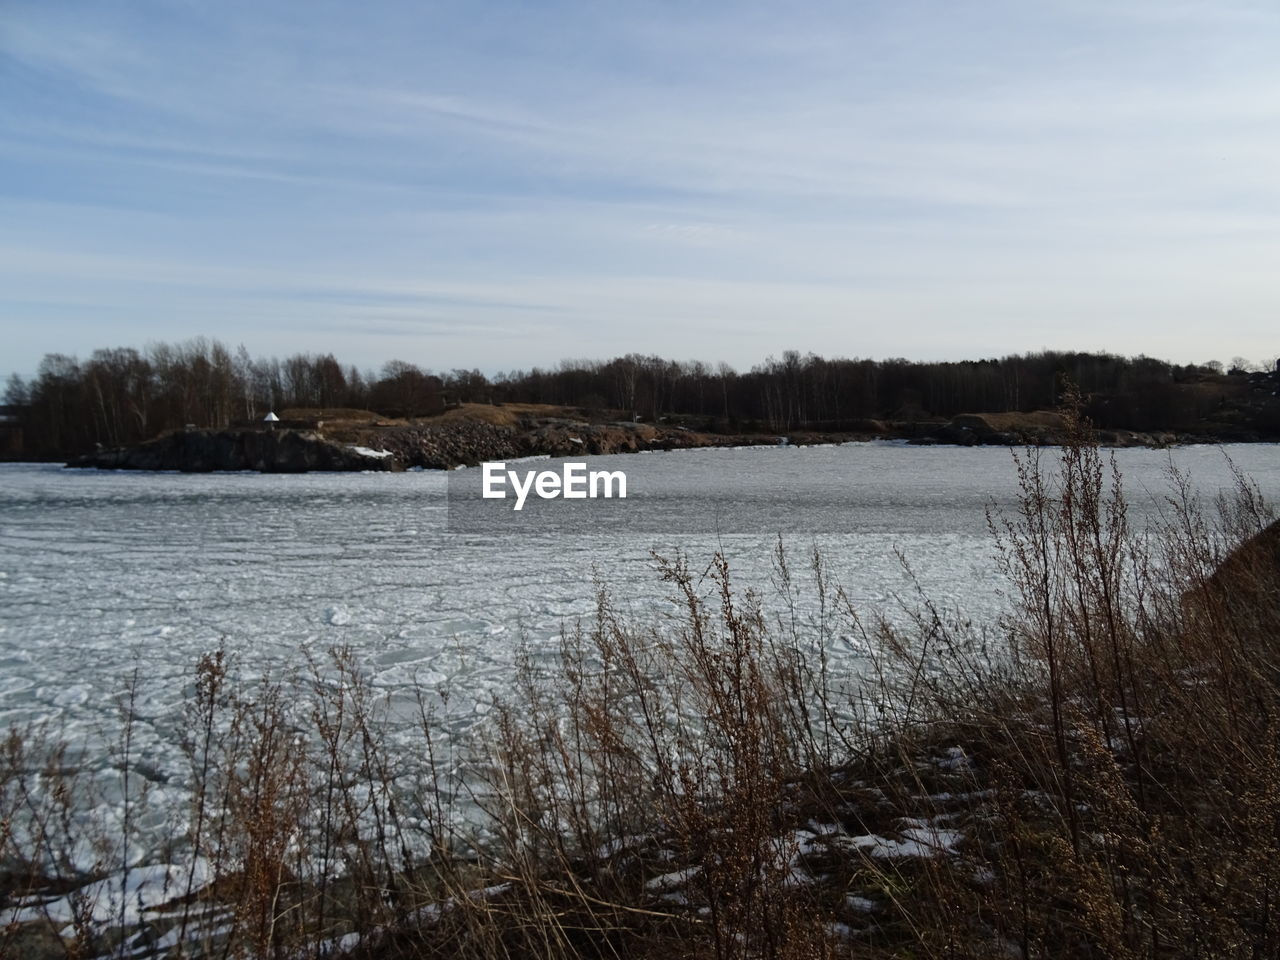 SCENIC VIEW OF LAKE DURING WINTER